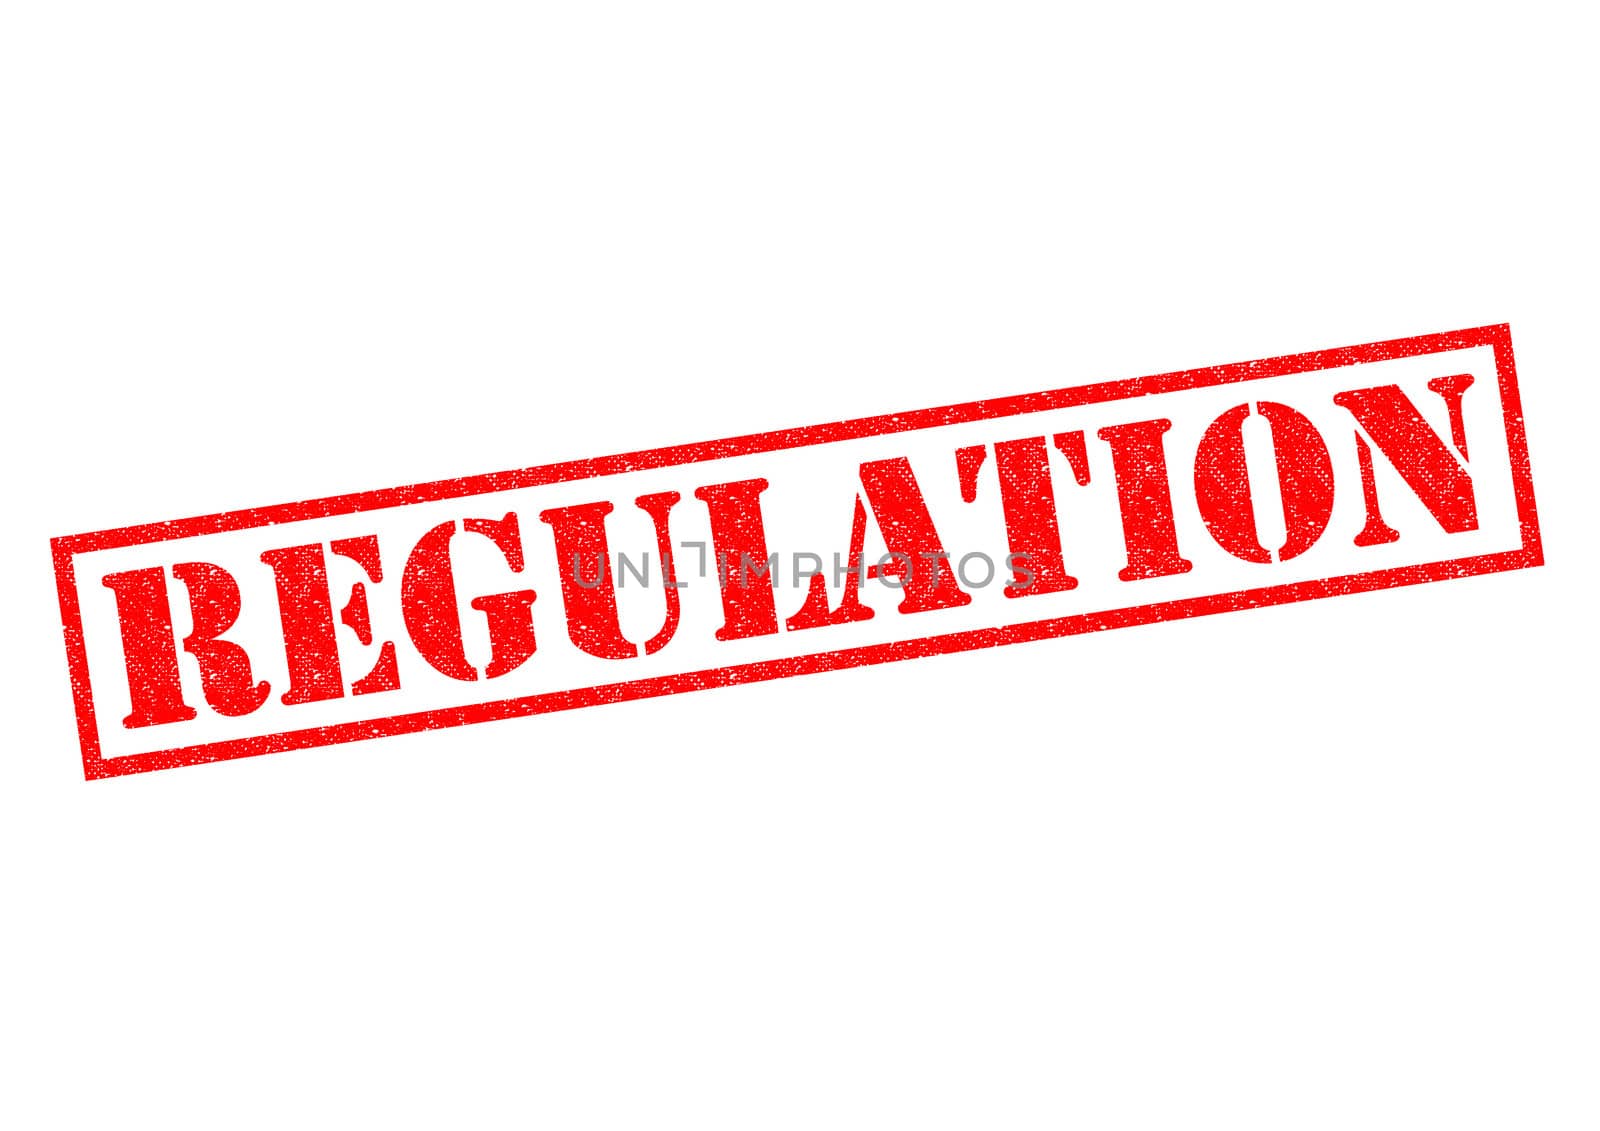 REGULATION red Rubber Stamp over a white background.